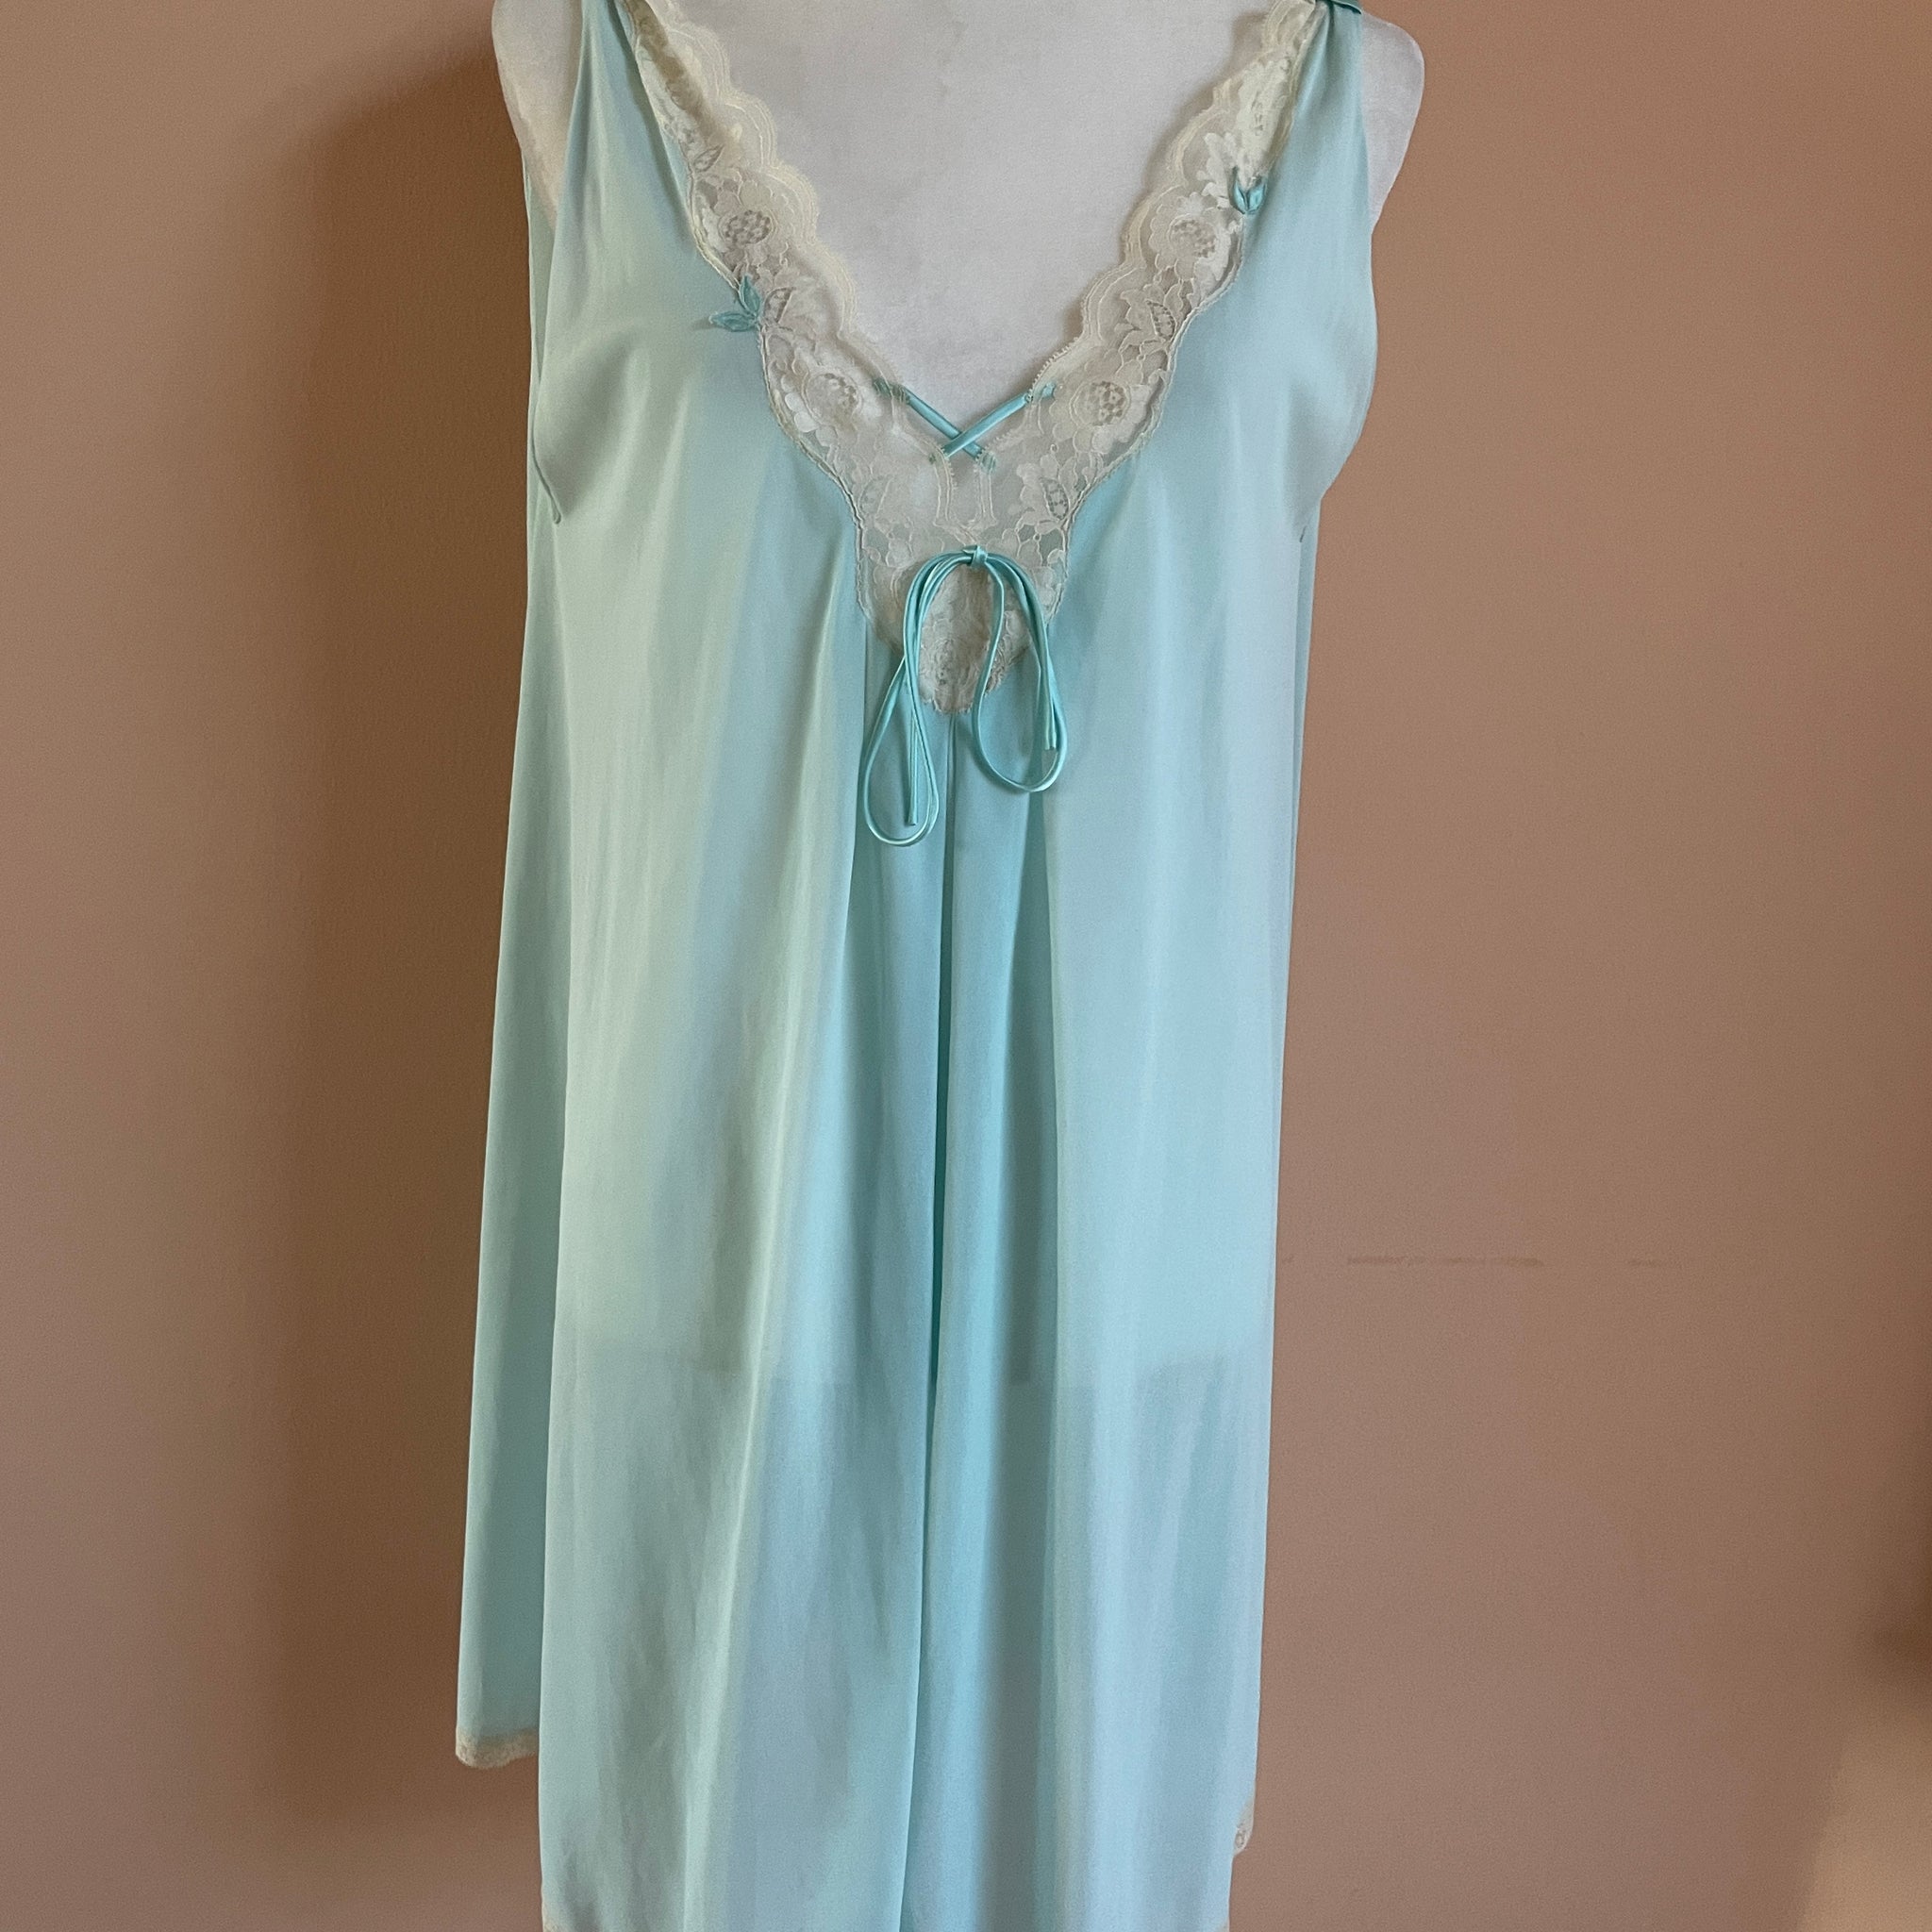 1970's lingerie nightgown